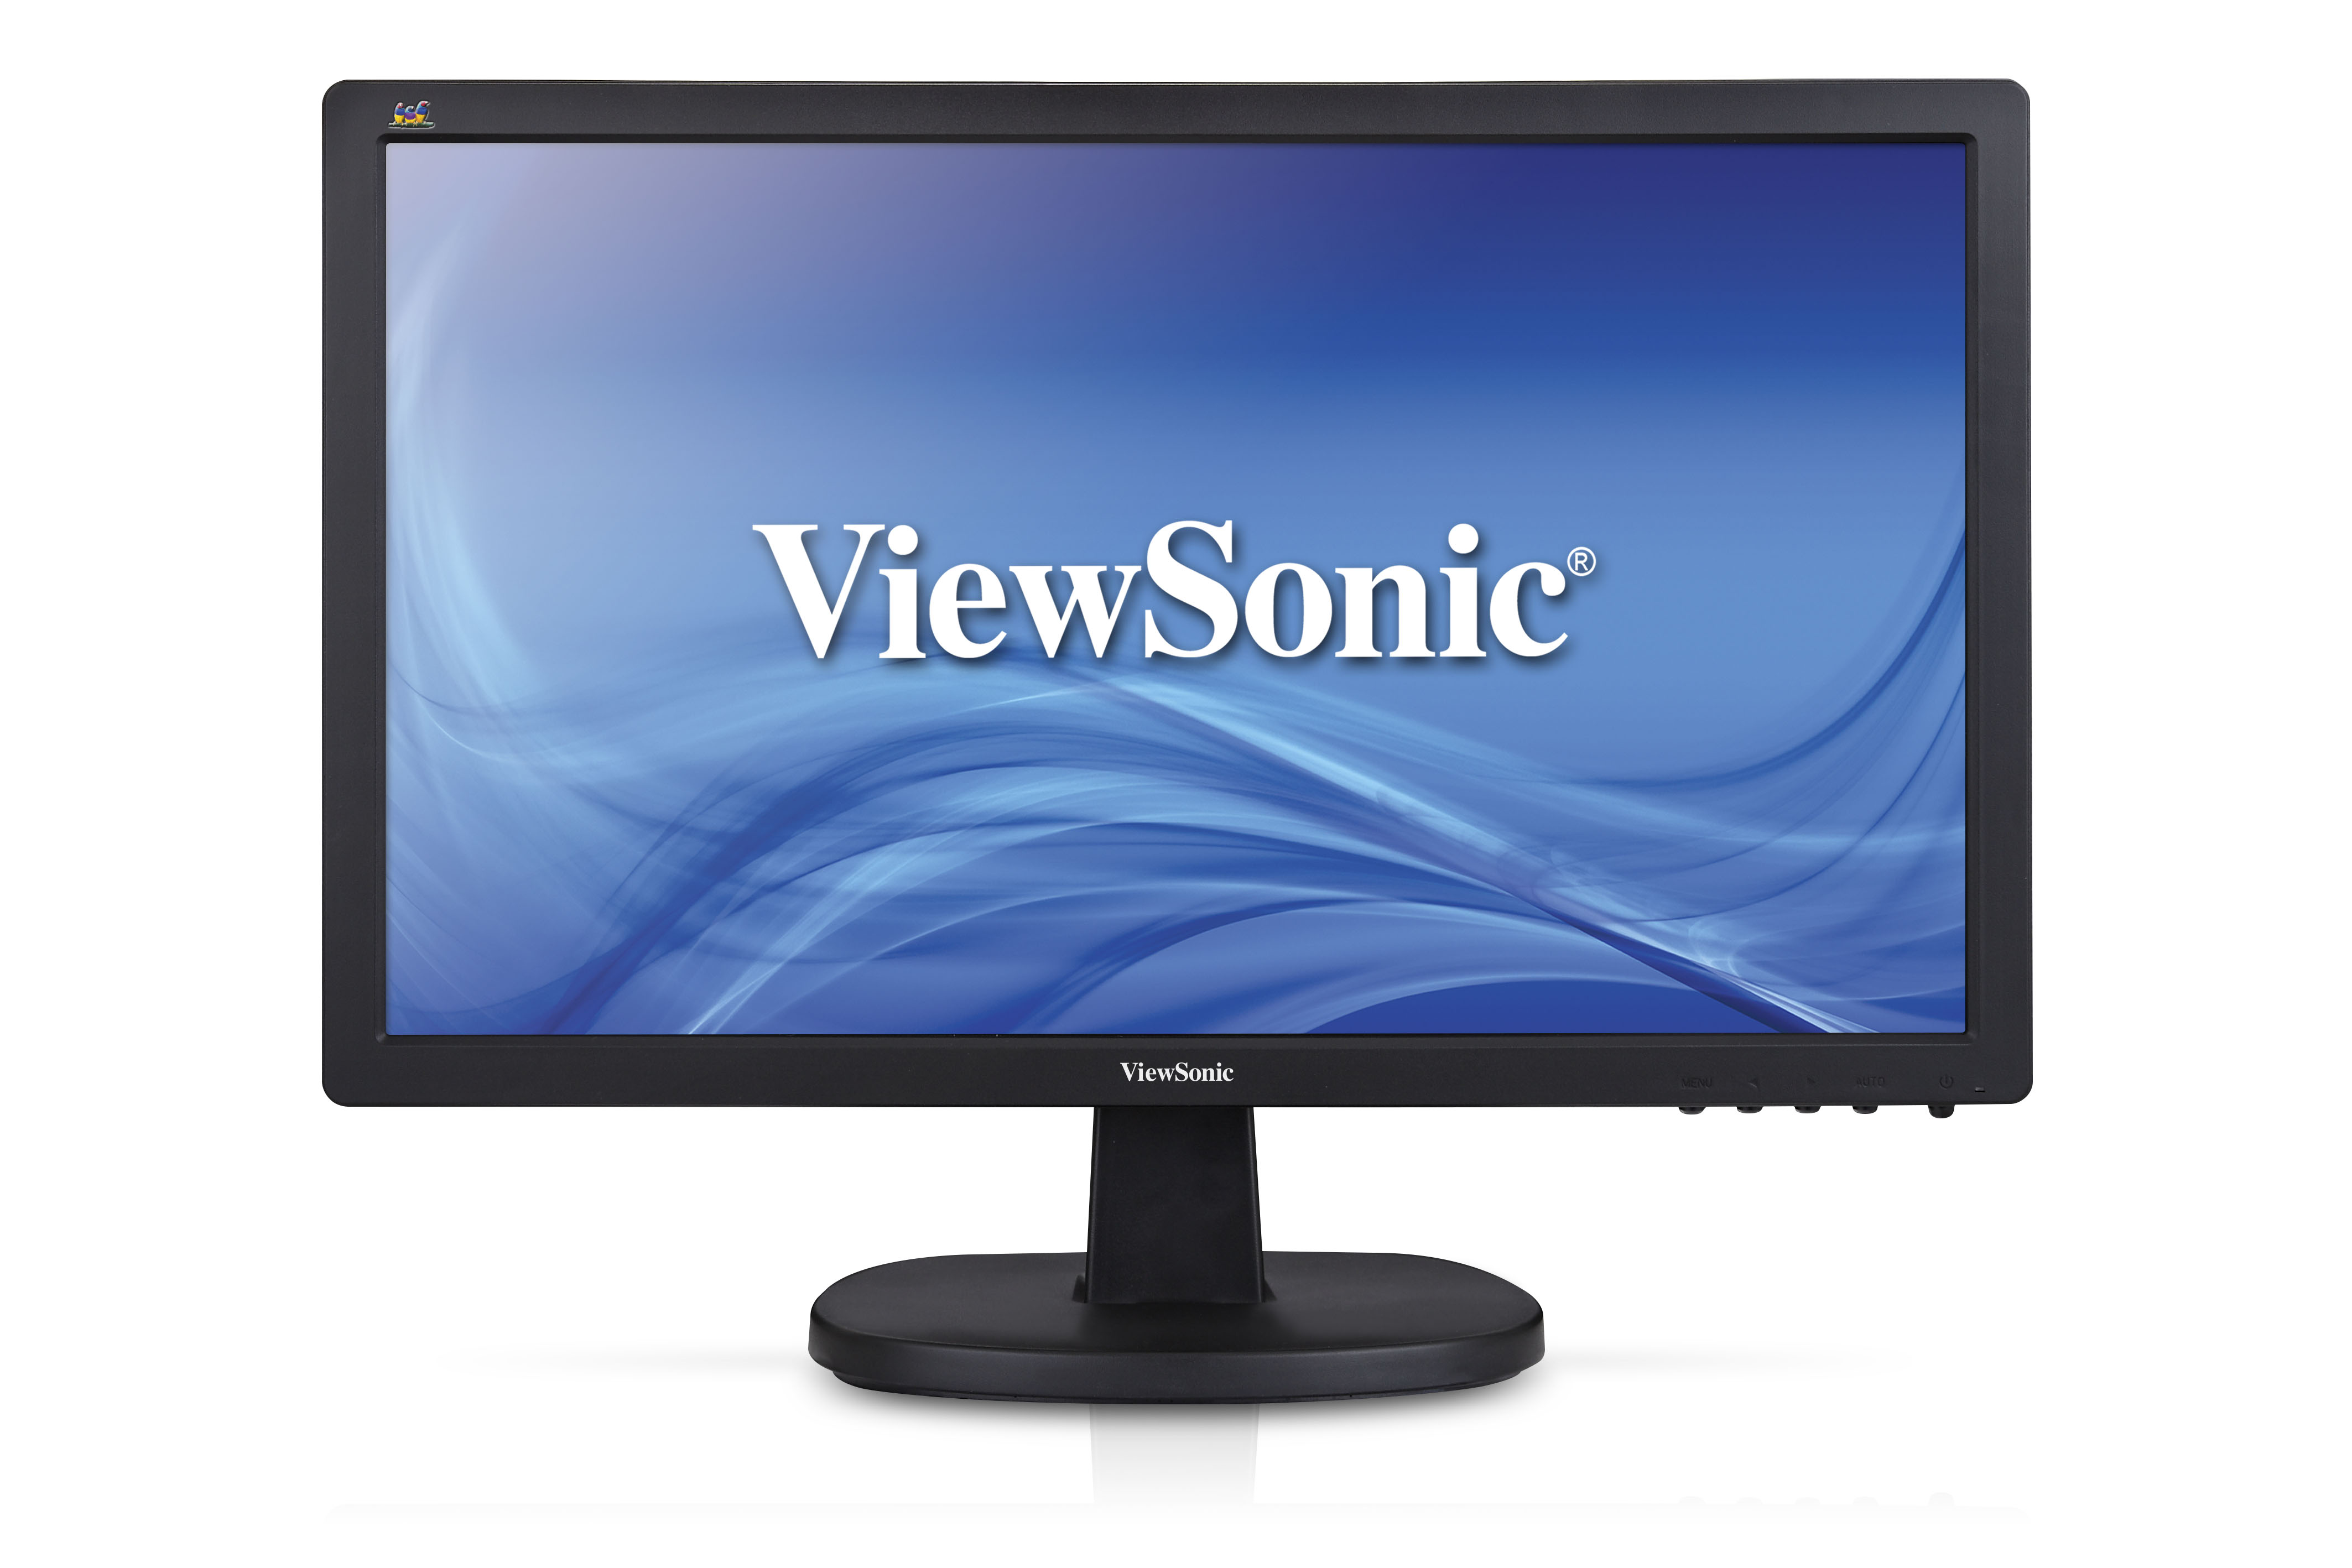 Drivers for viewsonic monitor